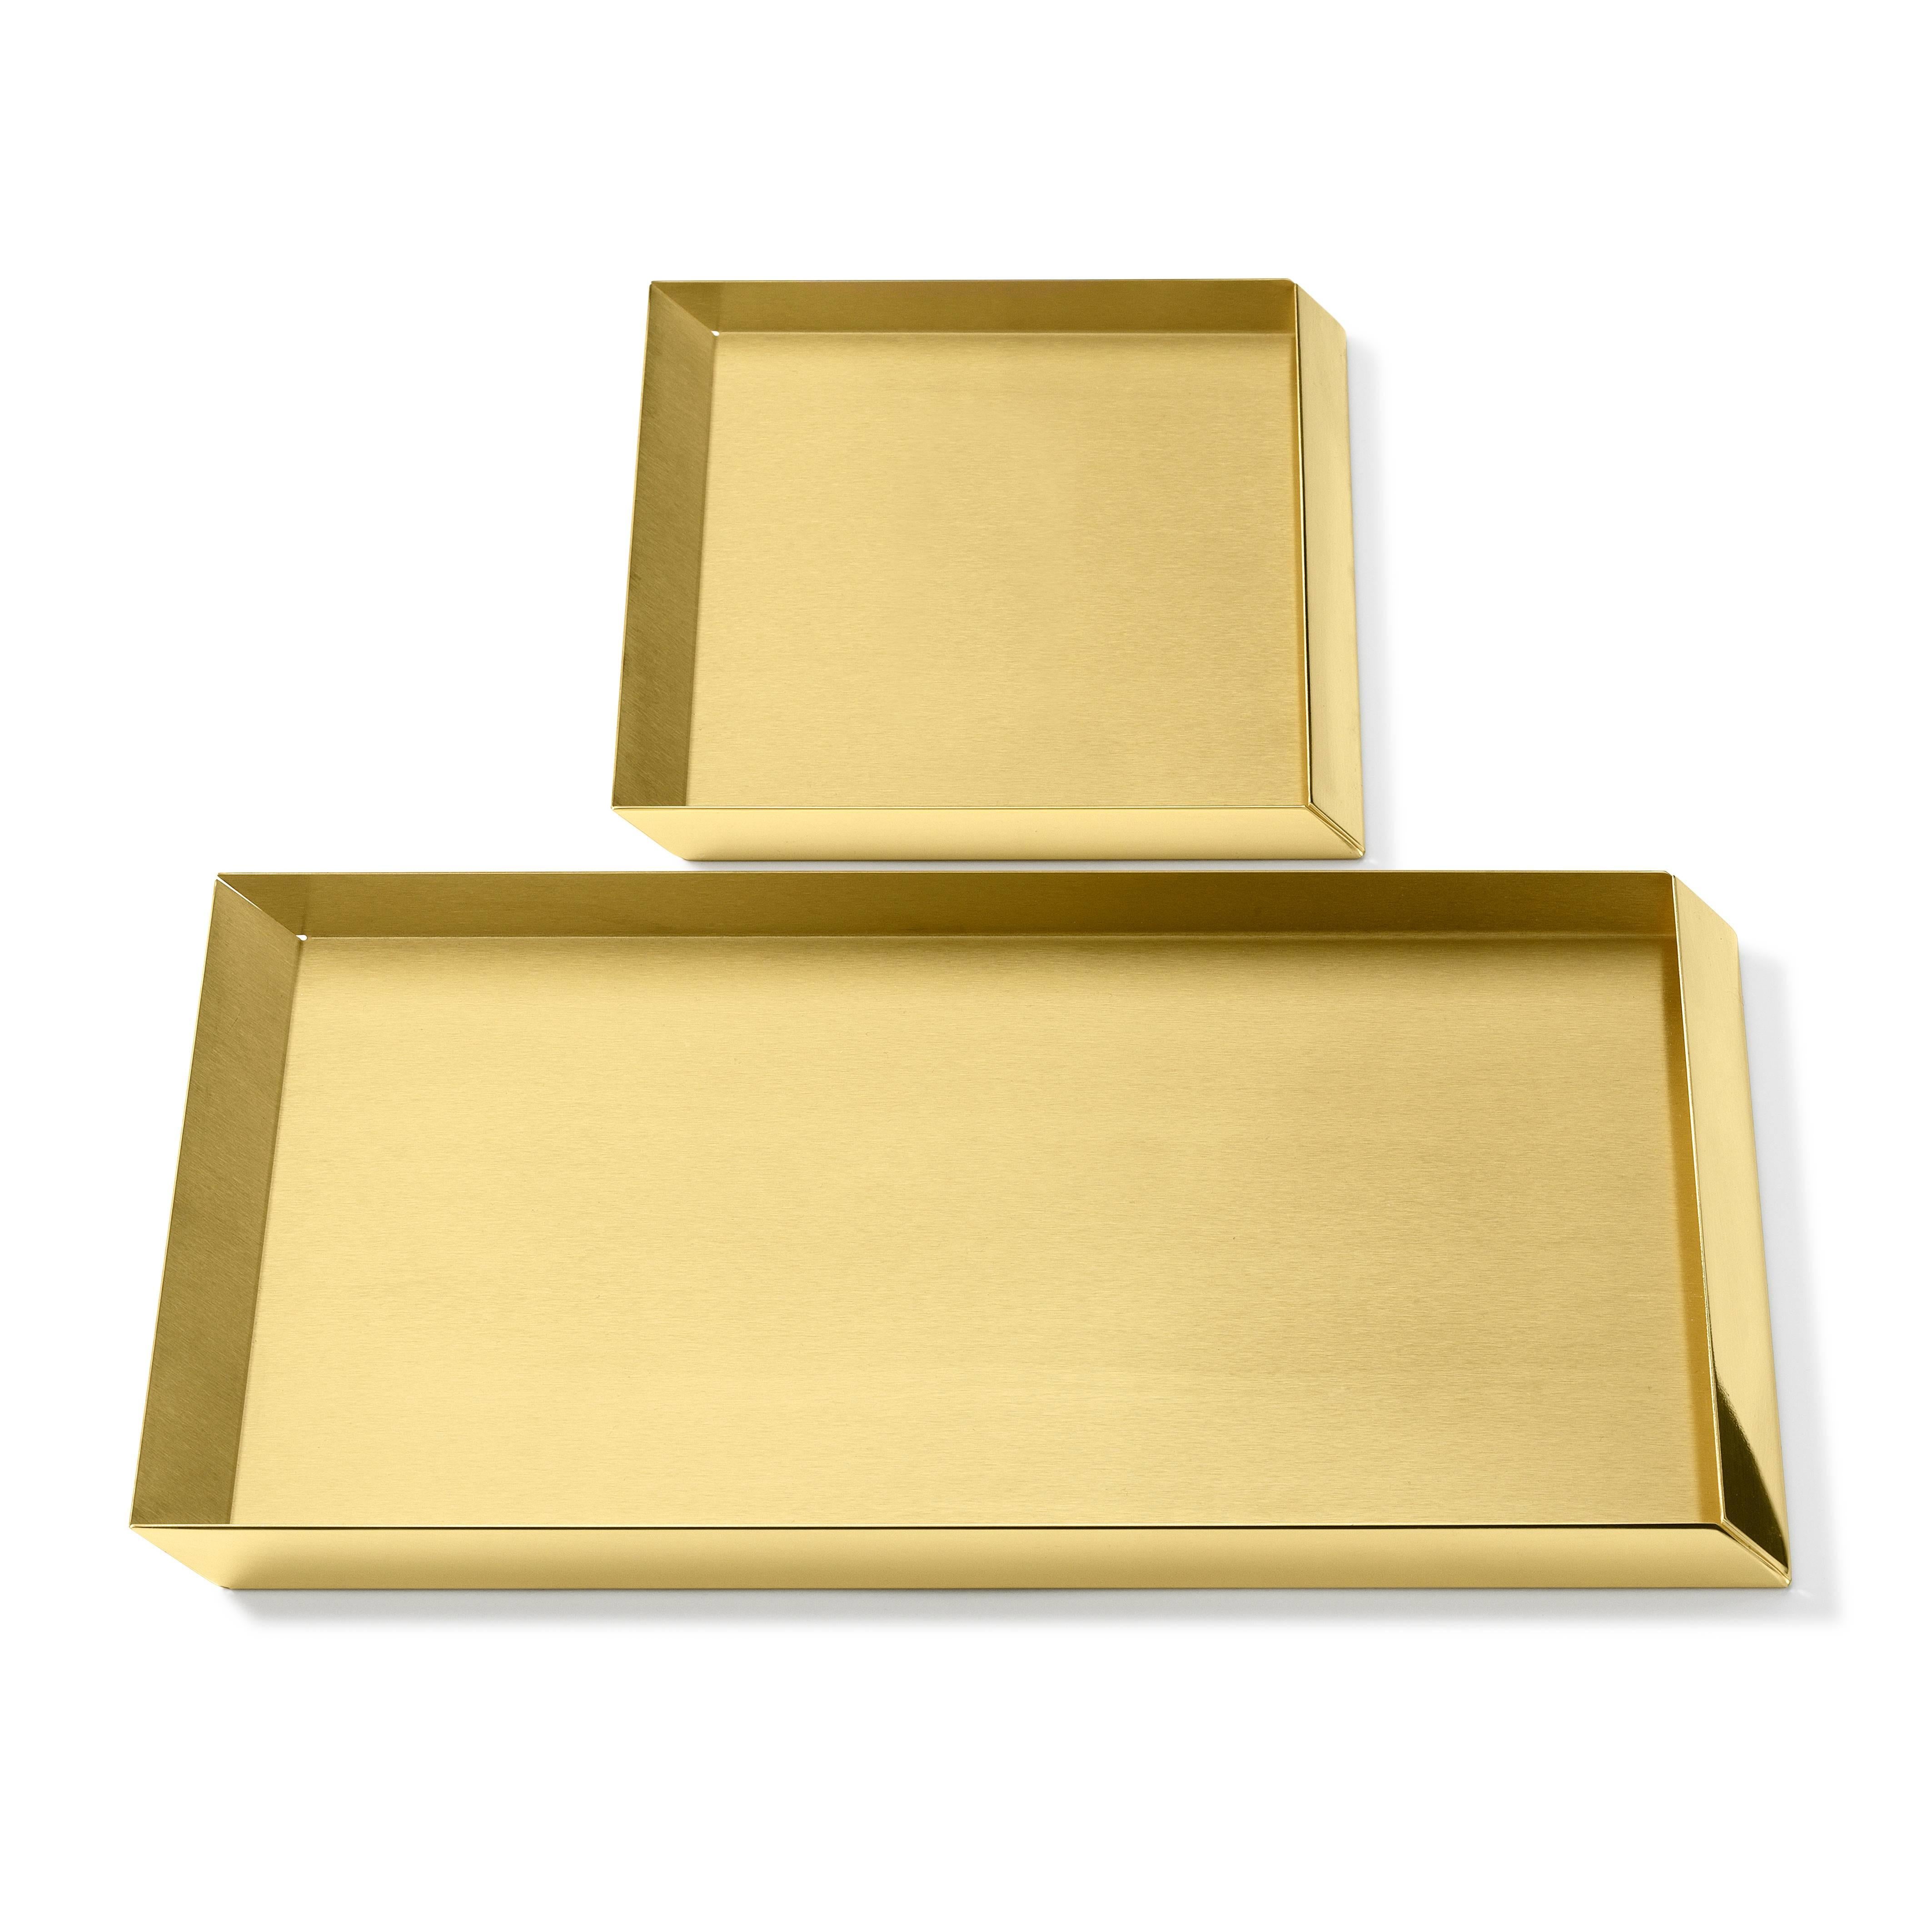 Trays in brass. The compositional scheme of this family of small trays is the axonometric isometric projection of two parallelepipeds which creates a three-dimensional optical effect implemented by inclined edges and by contrasting metal finishes.